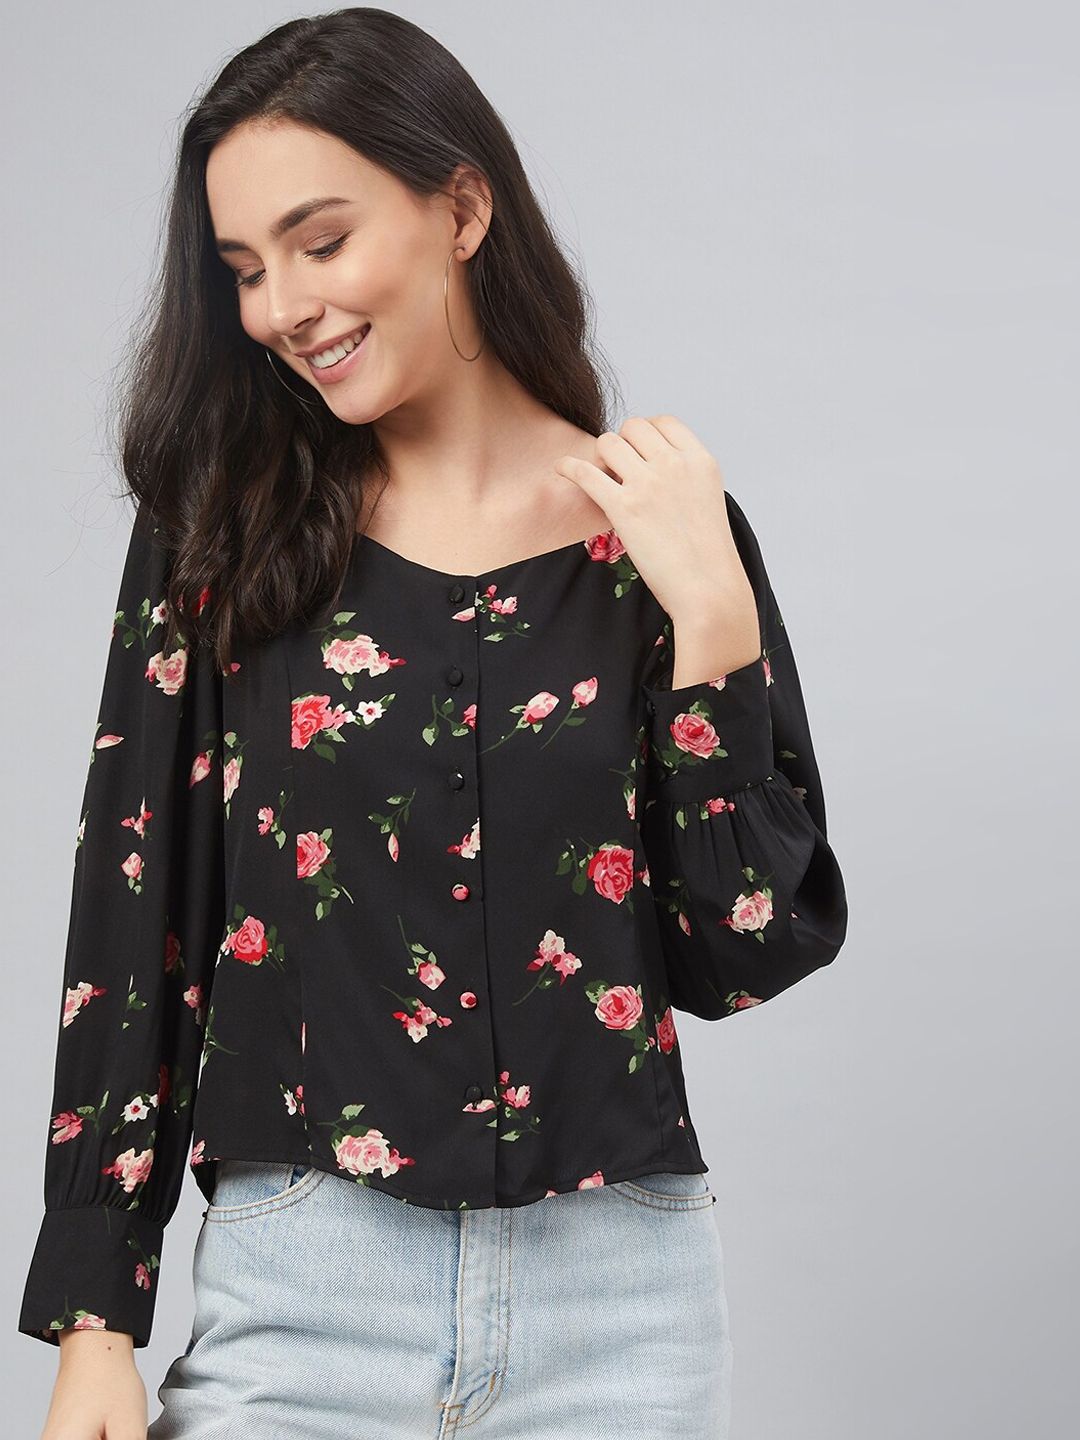 RARE Black & Pink Floral Shirt Style Top Price in India